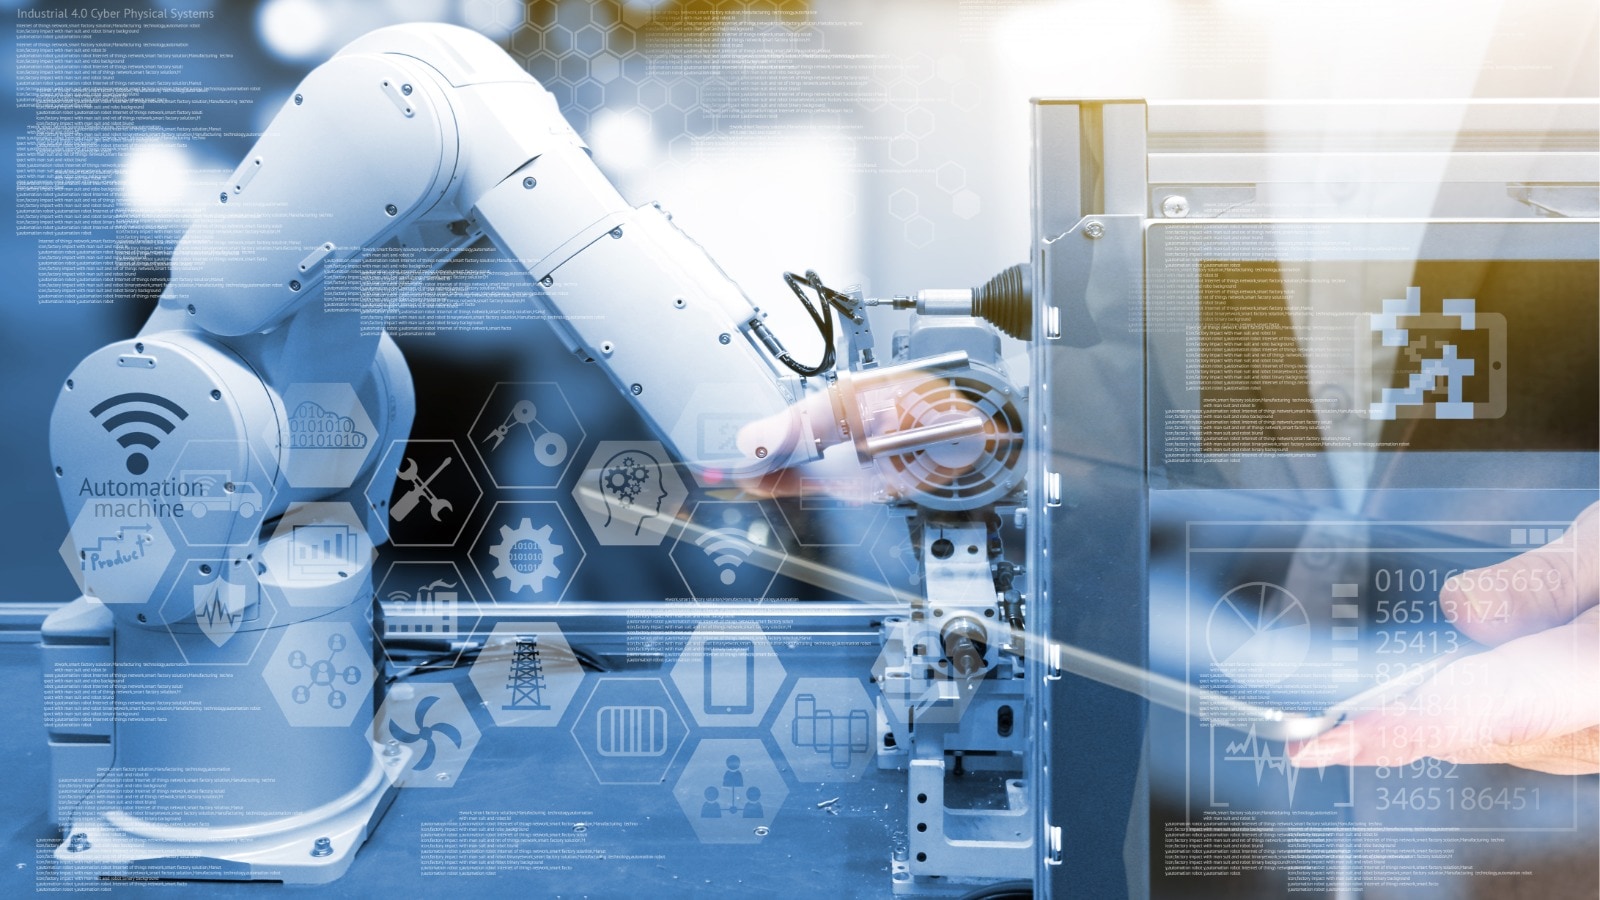 What is robotic process automation (RPA), and what can it do?